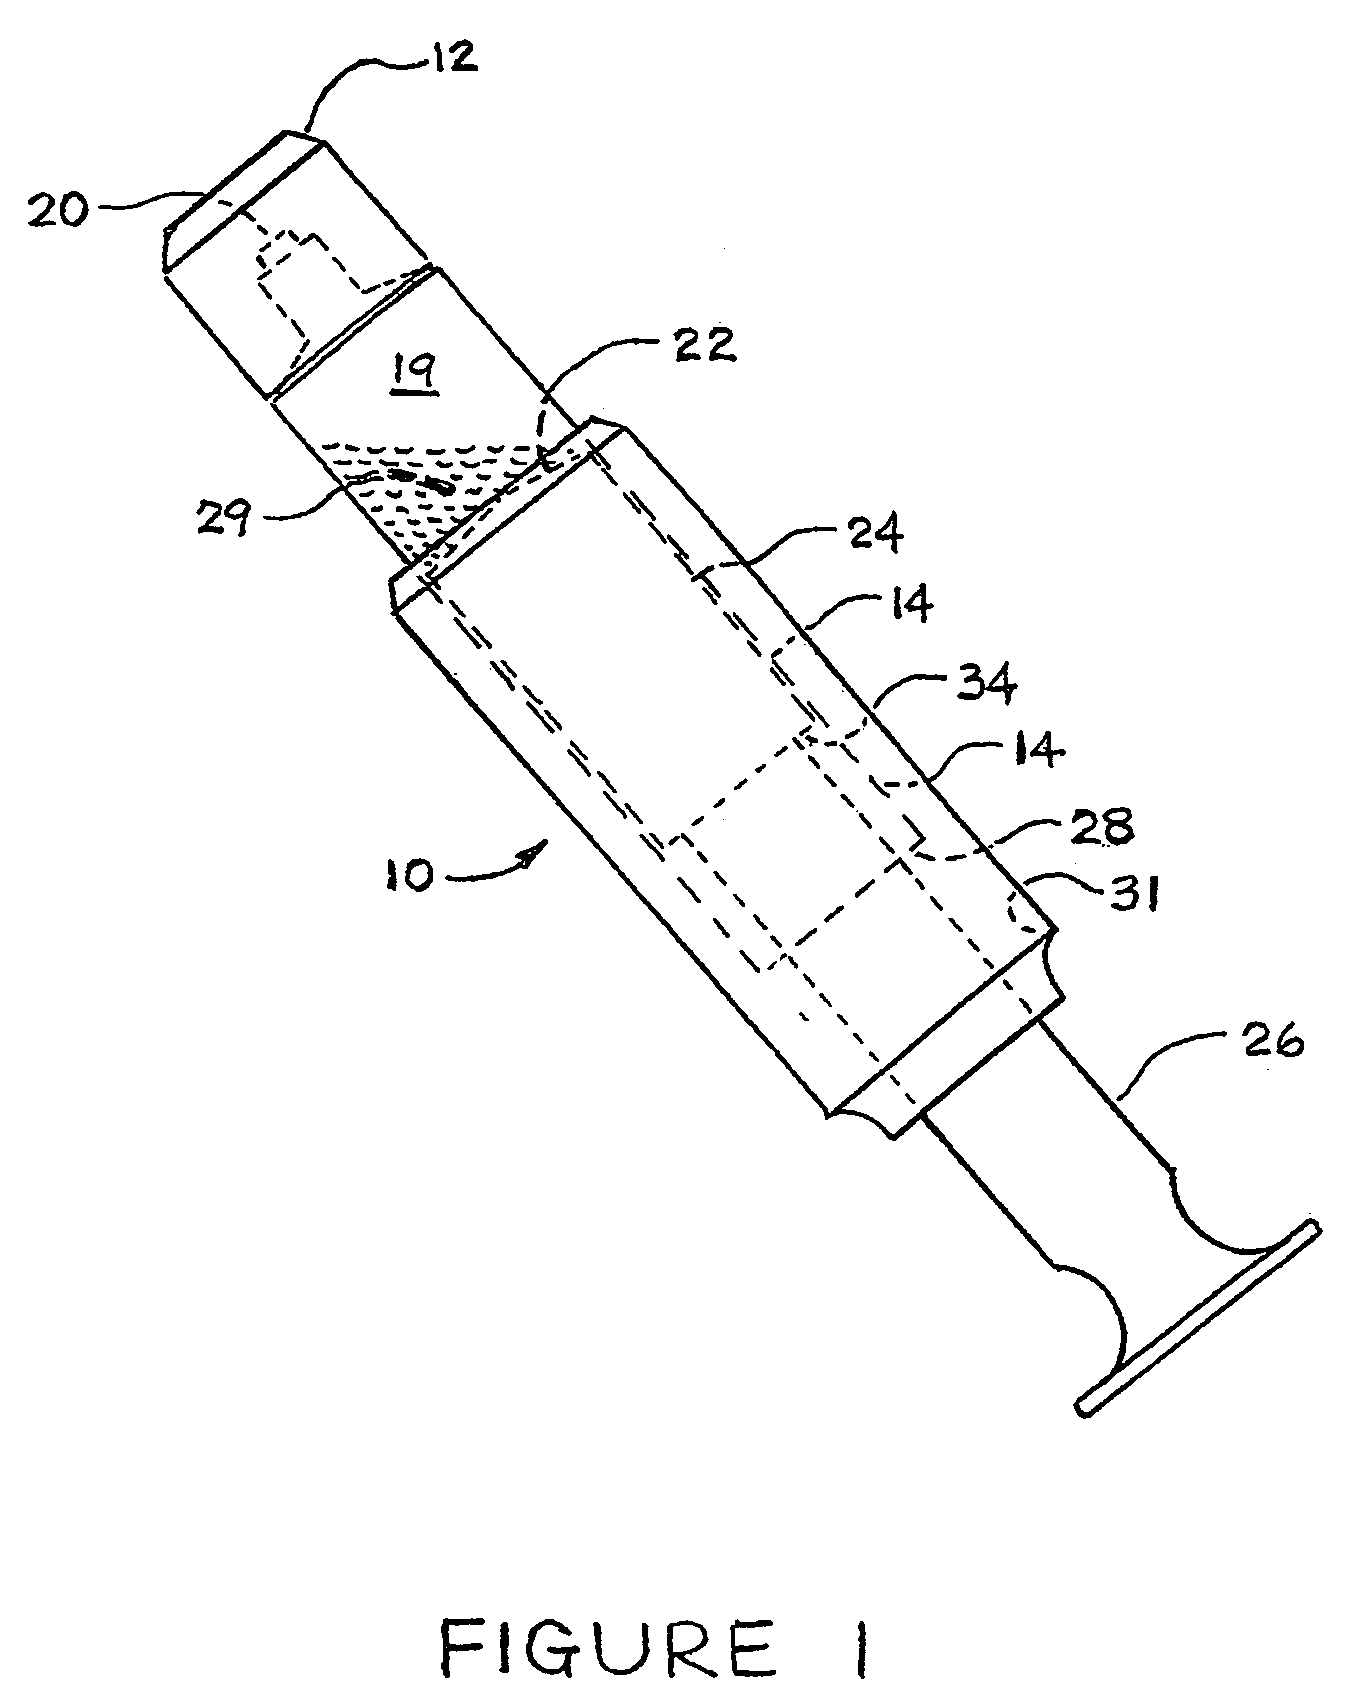 Methods of administering microparticles combined with autologous body components